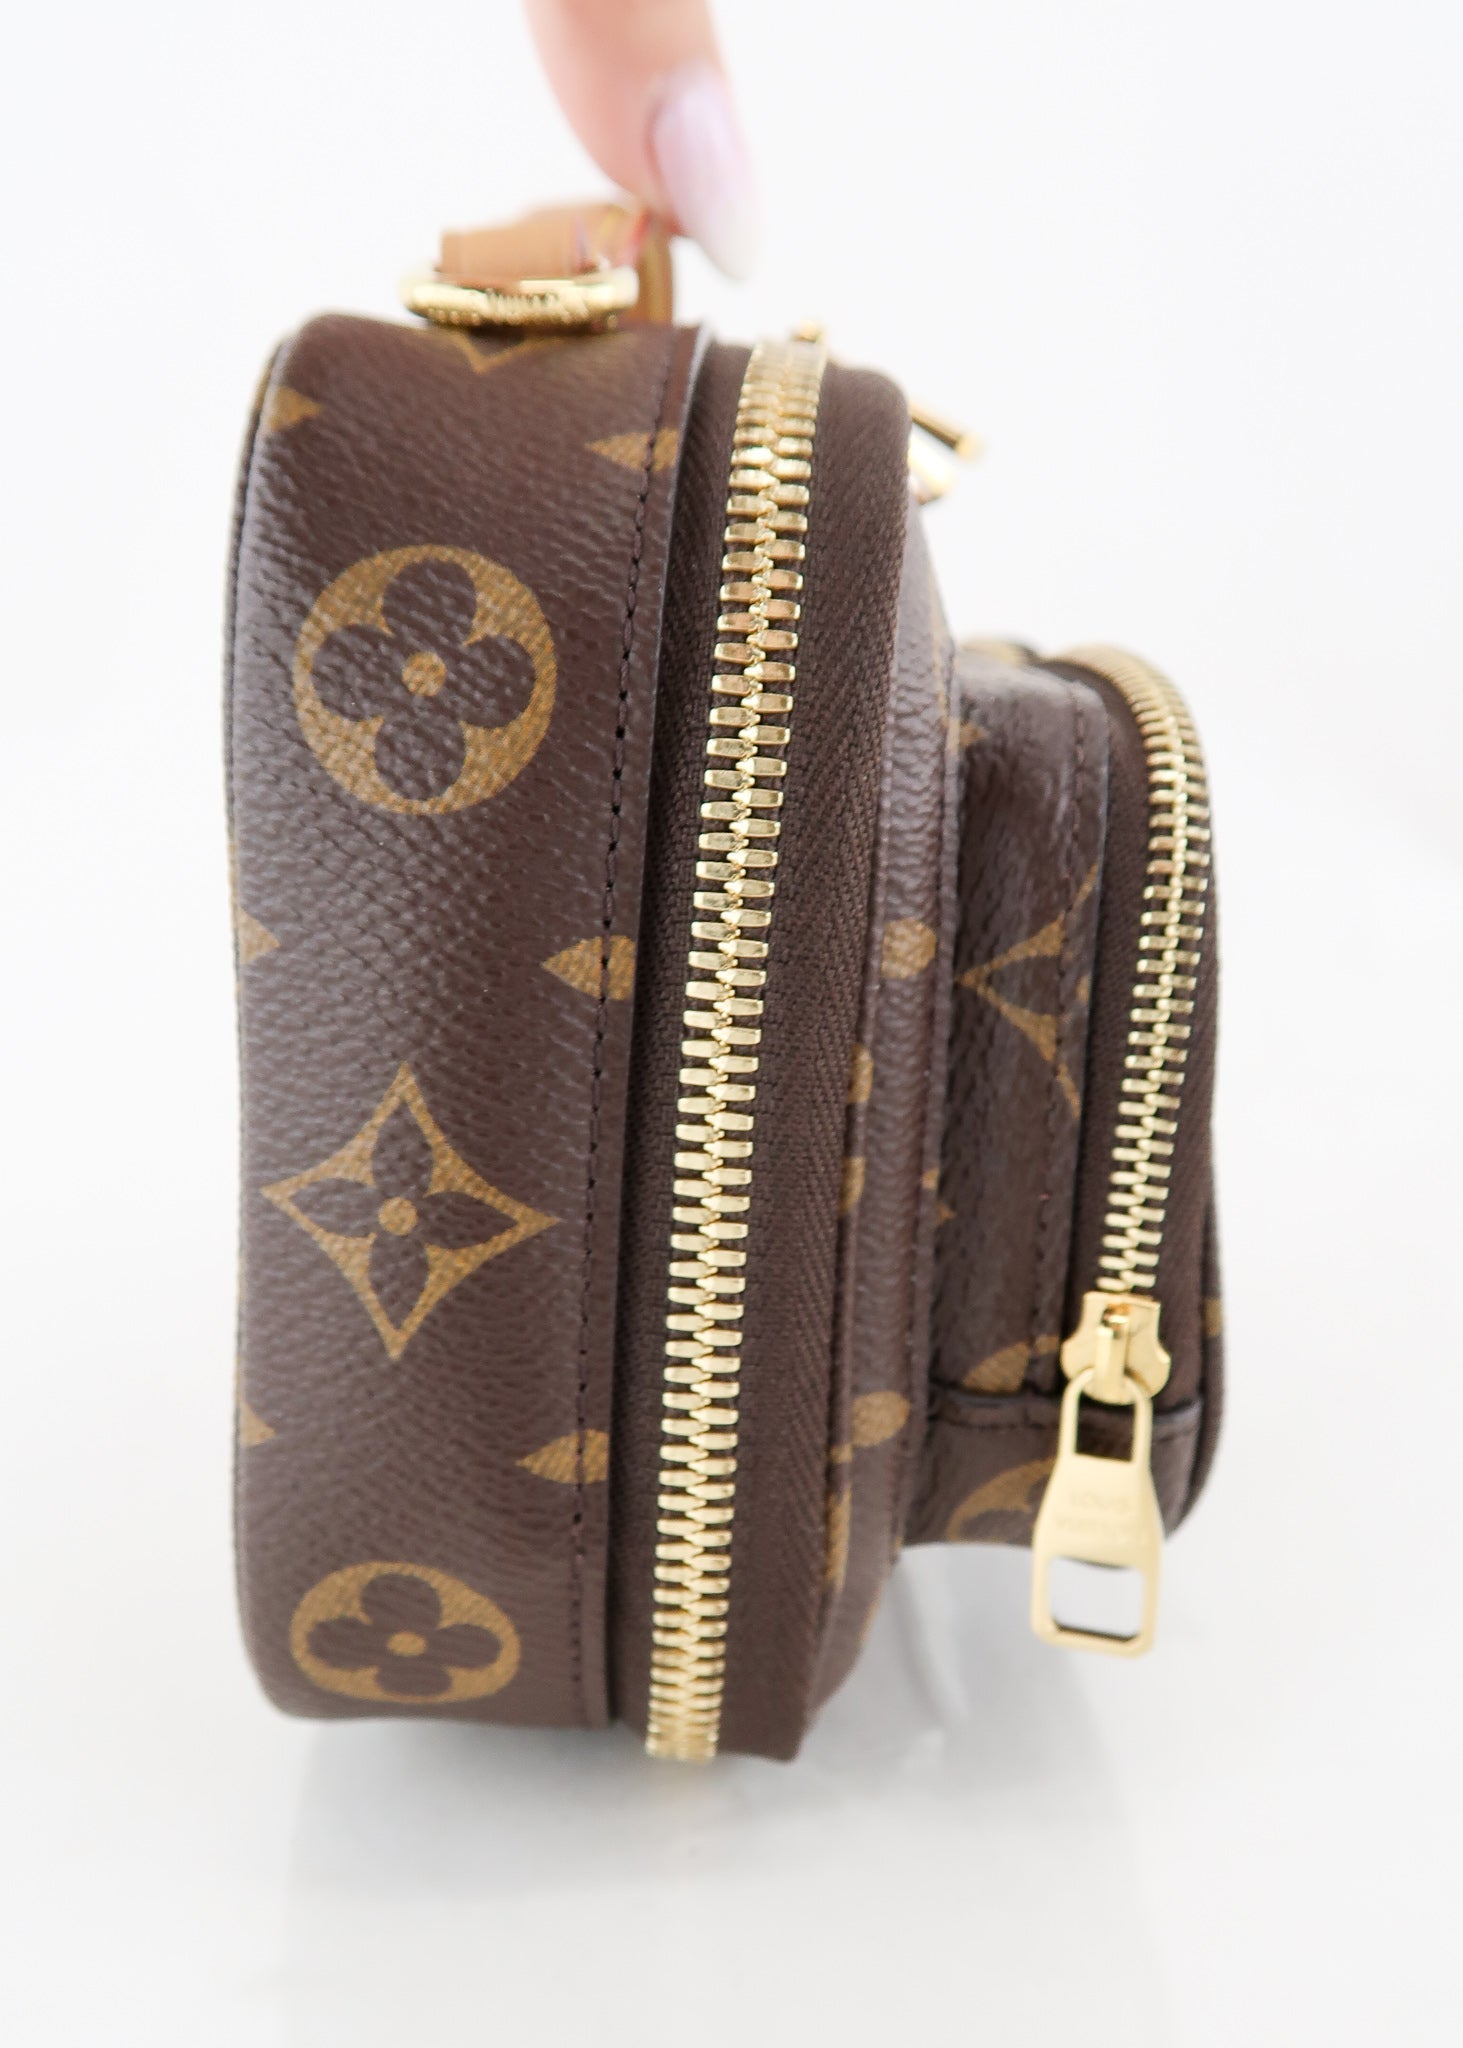 Louis Vuitton Utility Crossbody Monogram now on luxeitfwd.com.au 🤎  Featuring classic LV monogram coated canvas exterior, detachable/adjustable  web shoulder strap and multiple compartments/pockets . This monogramed  utility bag is available 